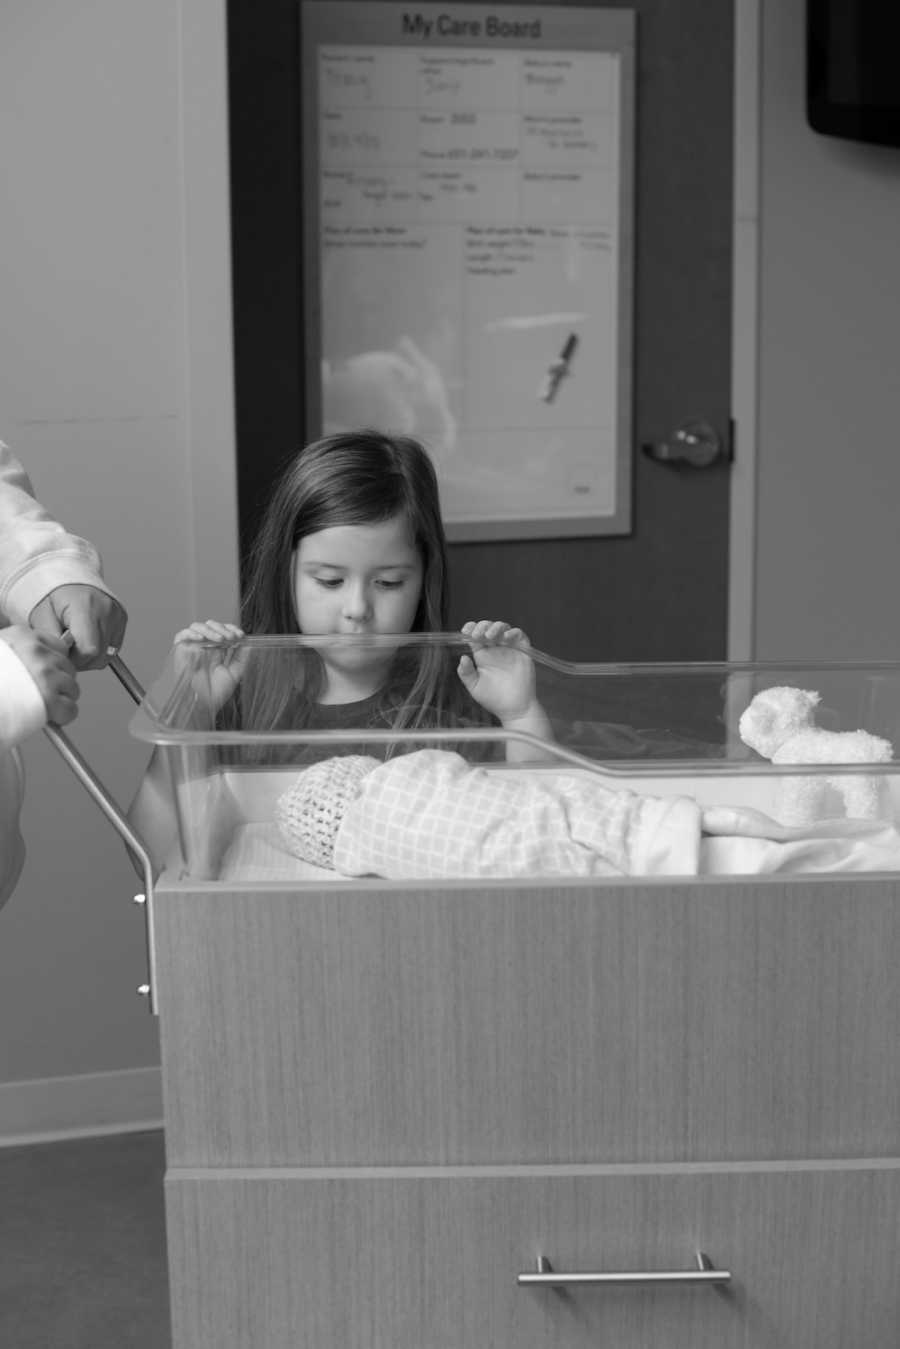 Older sister stands looking over baby sibling who lays asleep in hospital 